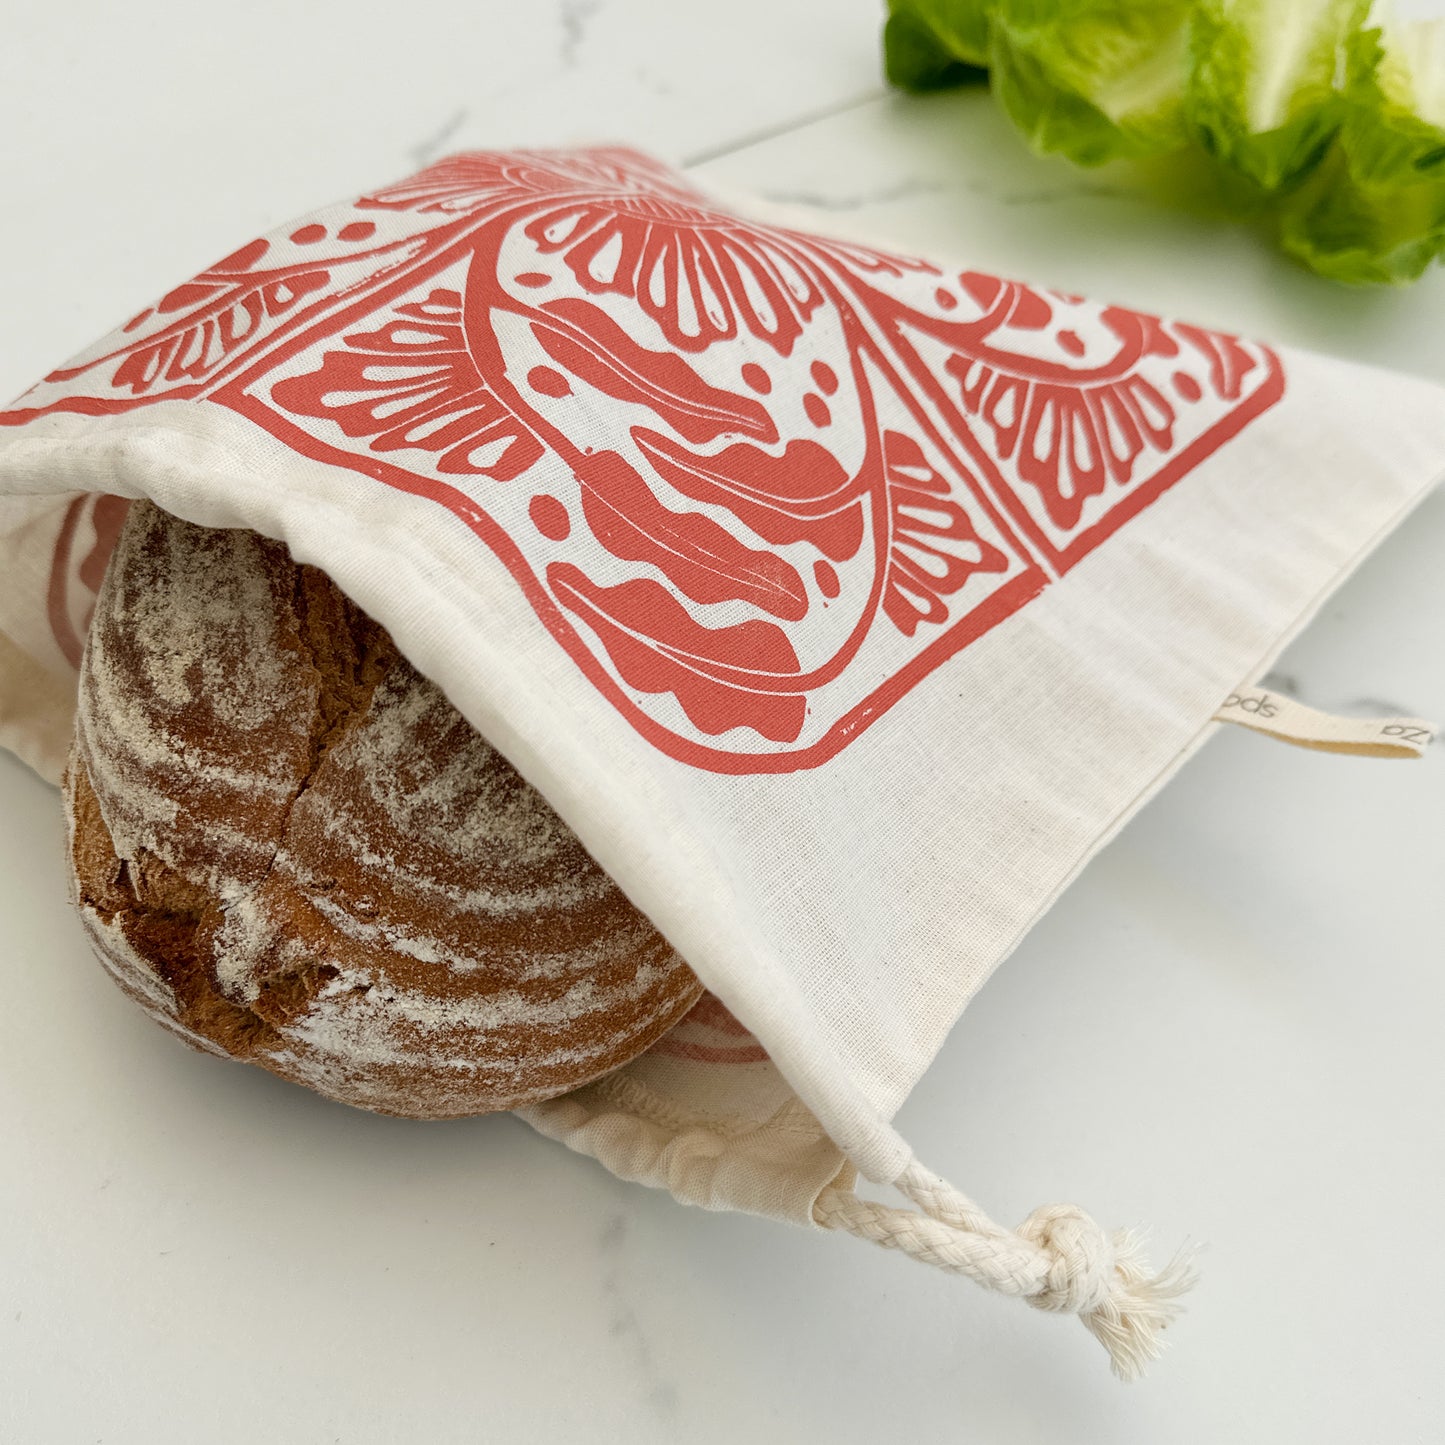 Bread Bag 11.5" square for round loaves organic cotton Madiba series